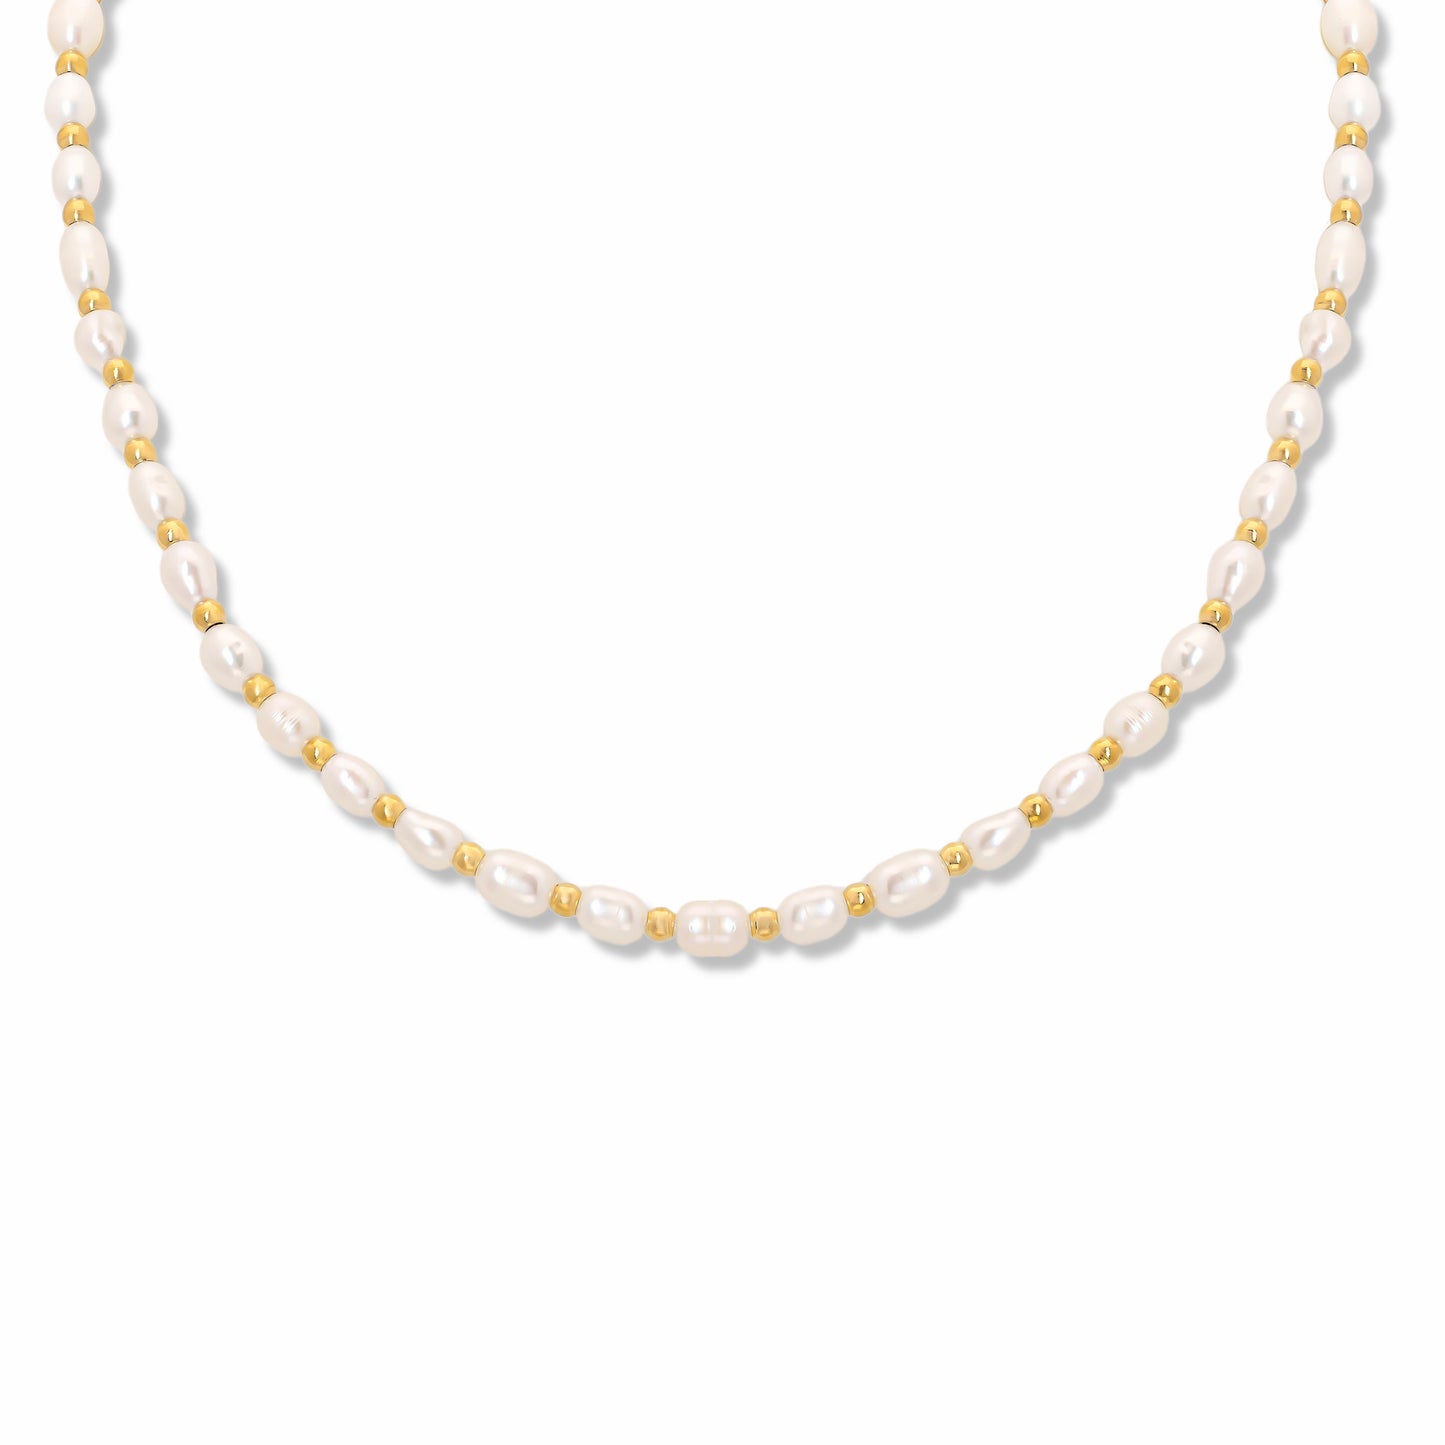 Gold Bead Pearl Necklace on white background